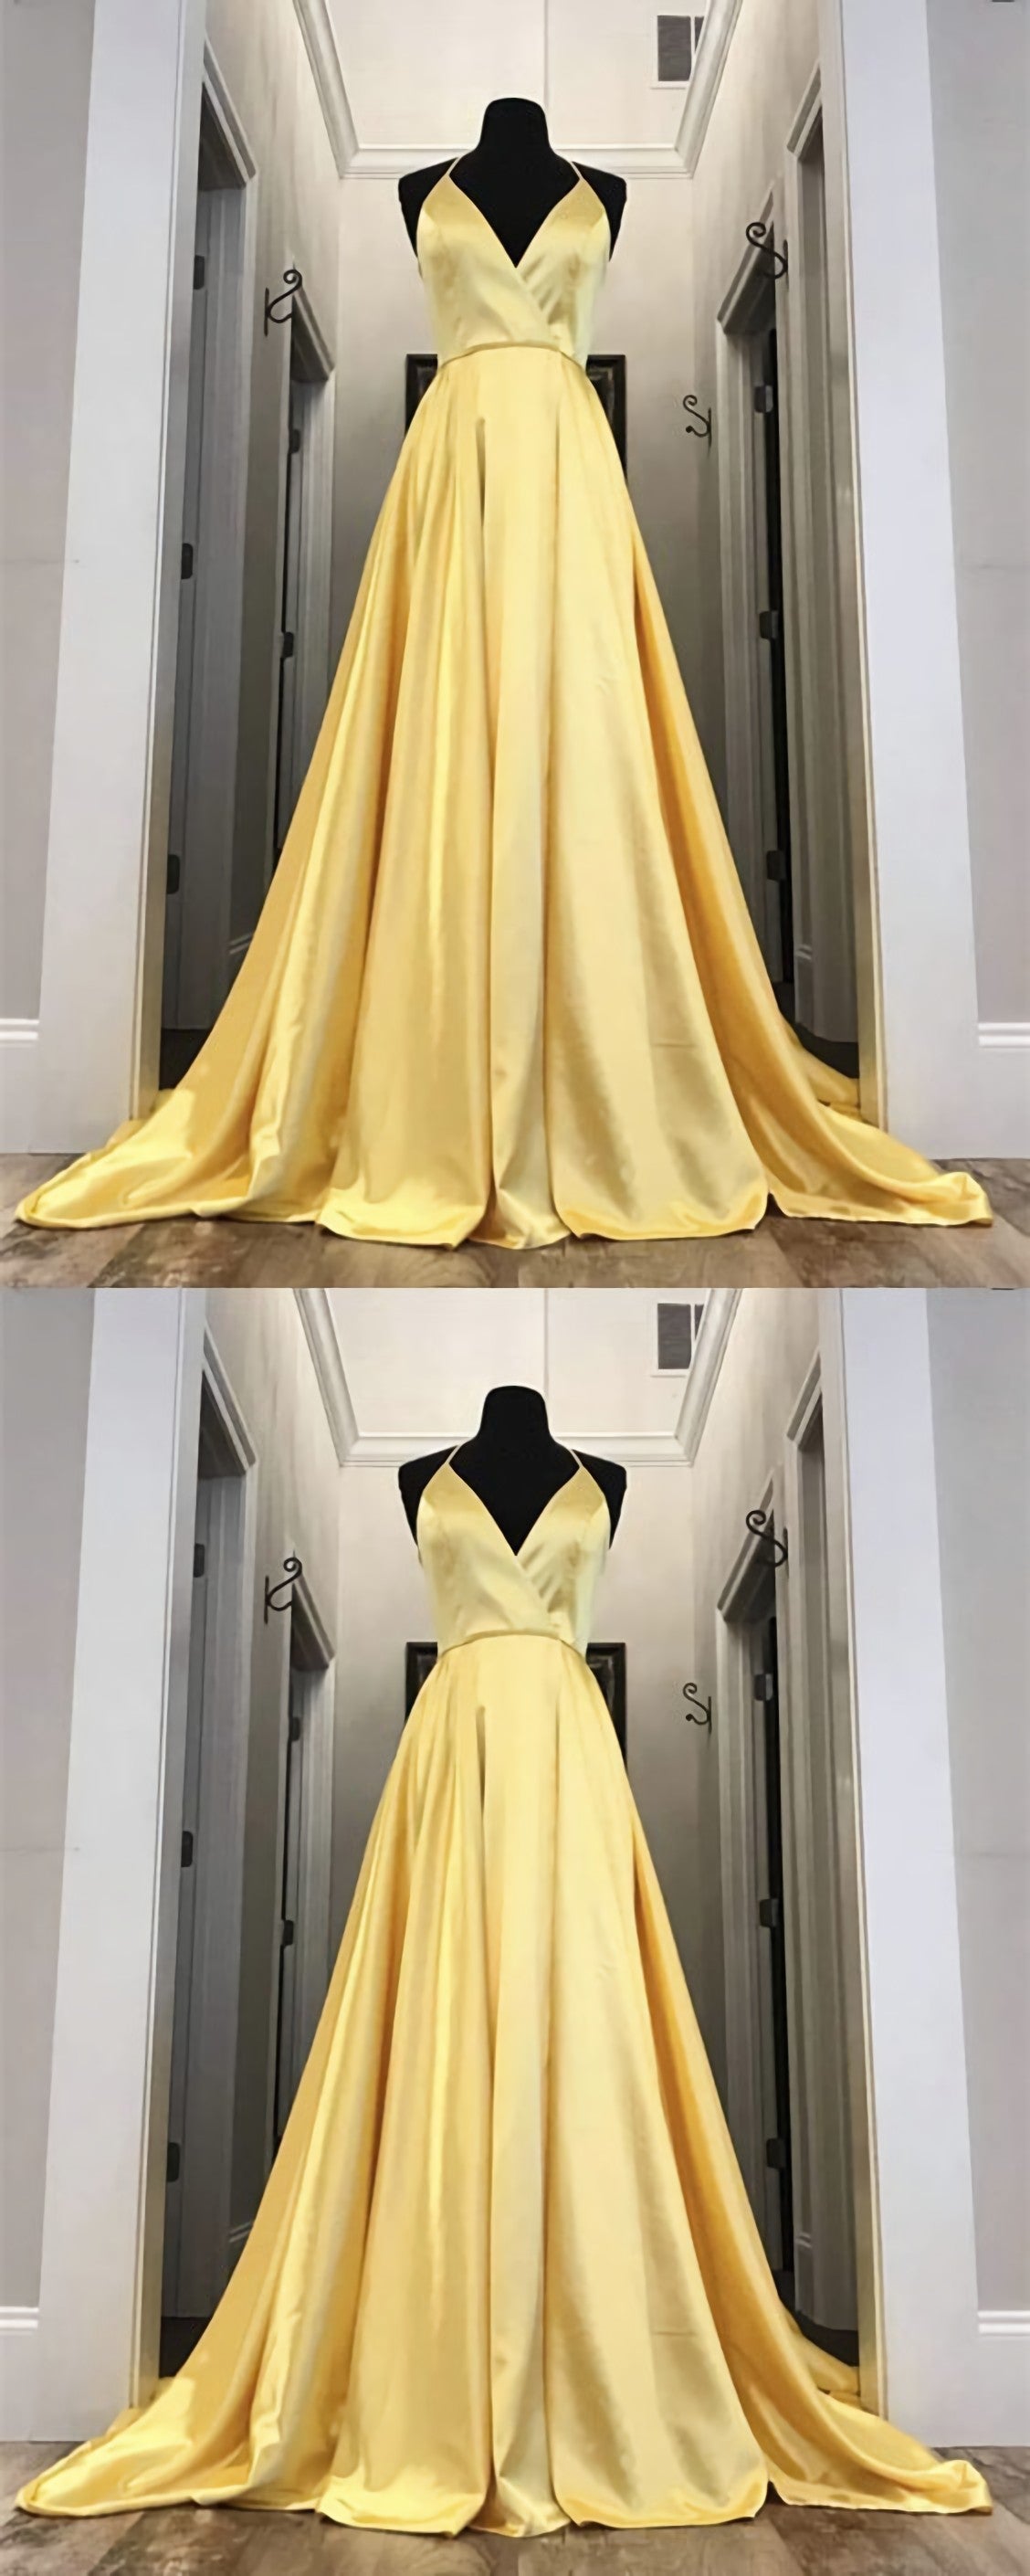 Party Dress Midi With Sleeves, Long Yellow Prom Dresses, Leg Split Evening Gowns